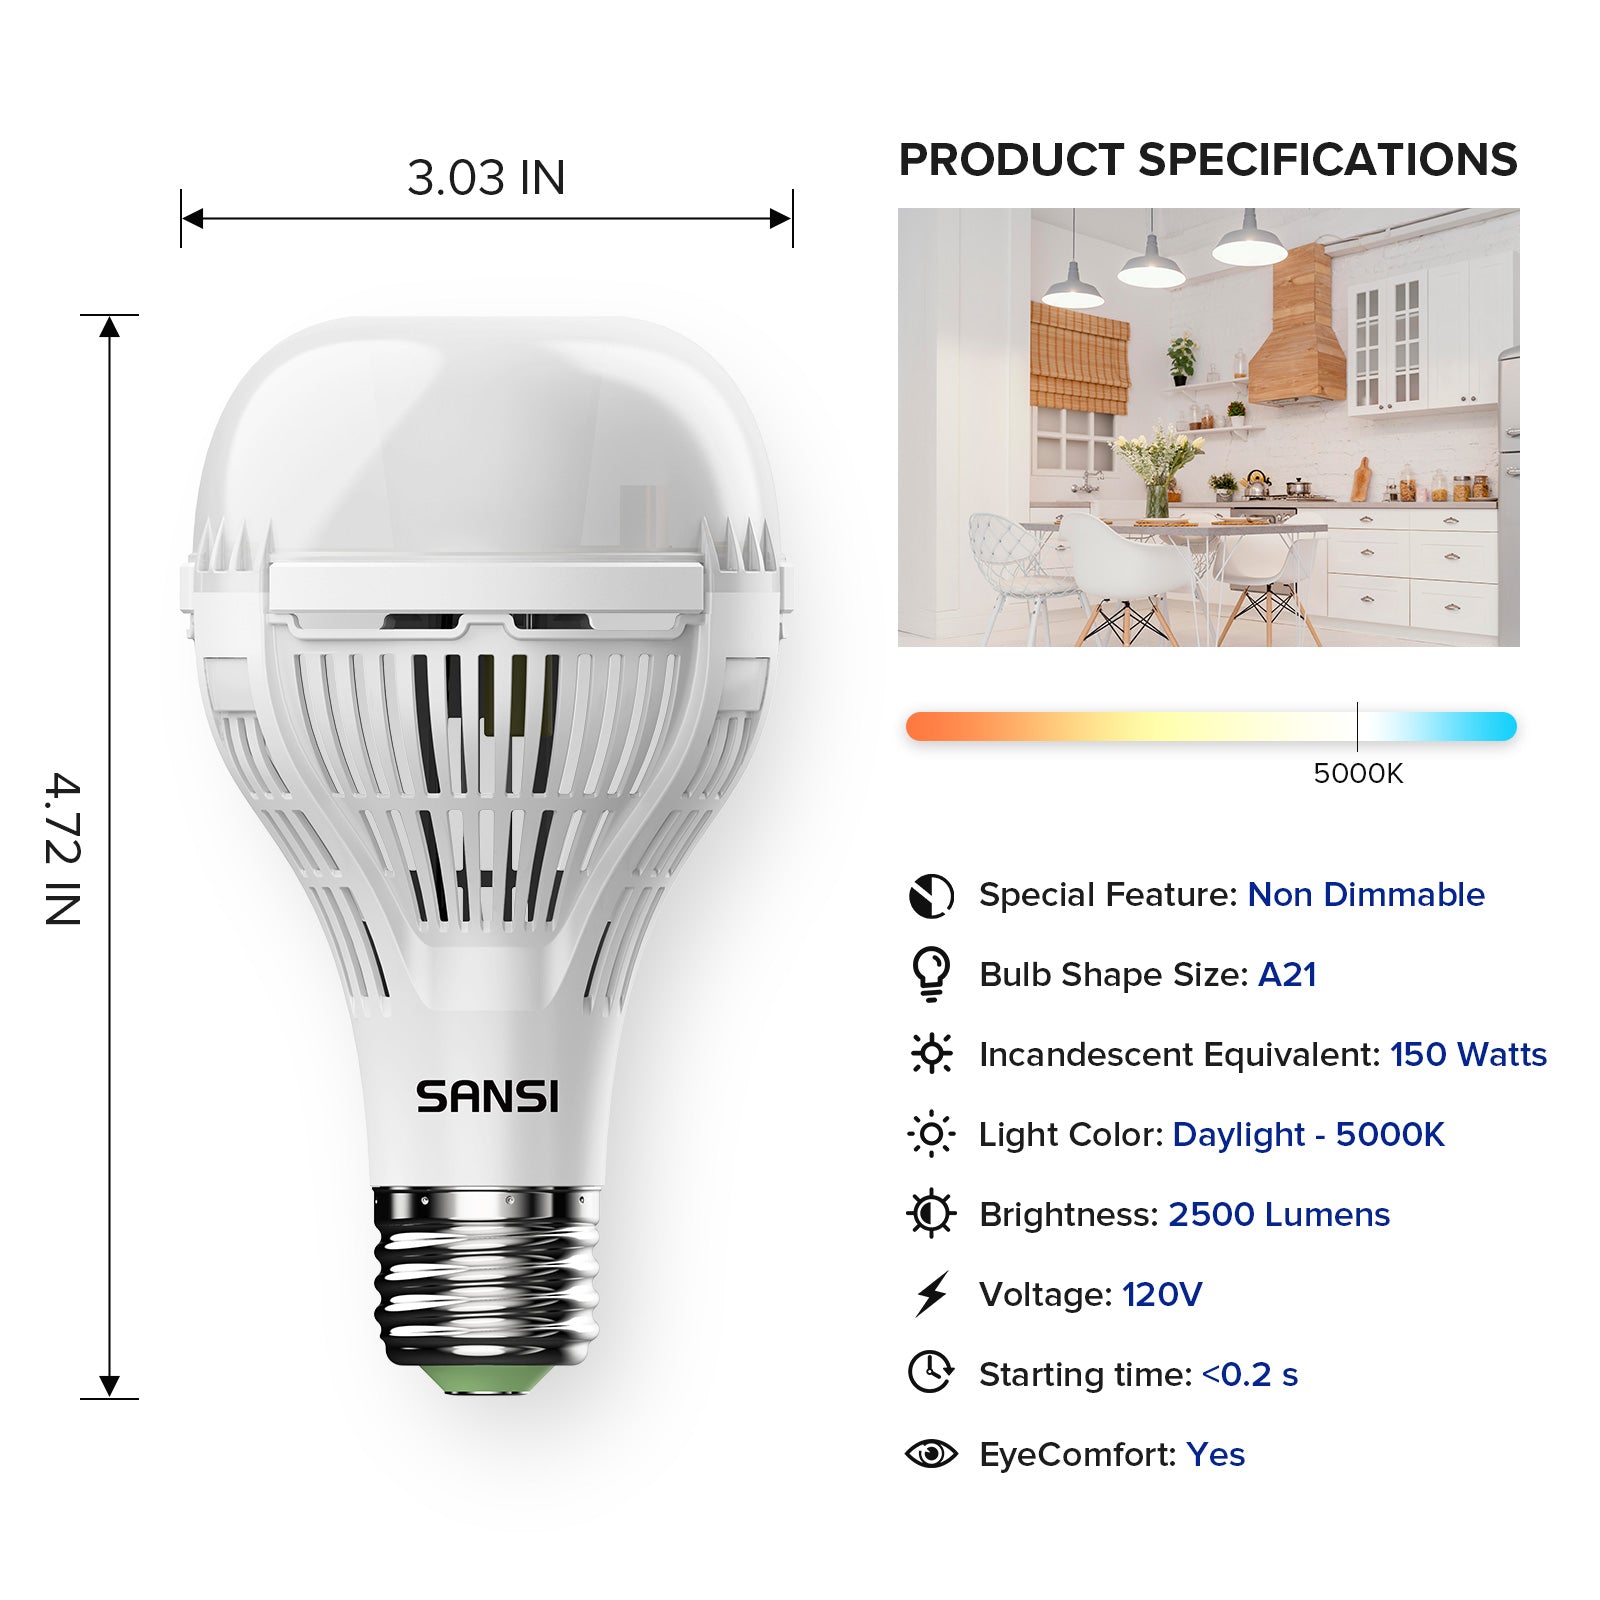 Upgraded A21 18W led light bulb, non dimmable, 150W equivalent, 5000K daylight, 25000 lumens, eyecomfort